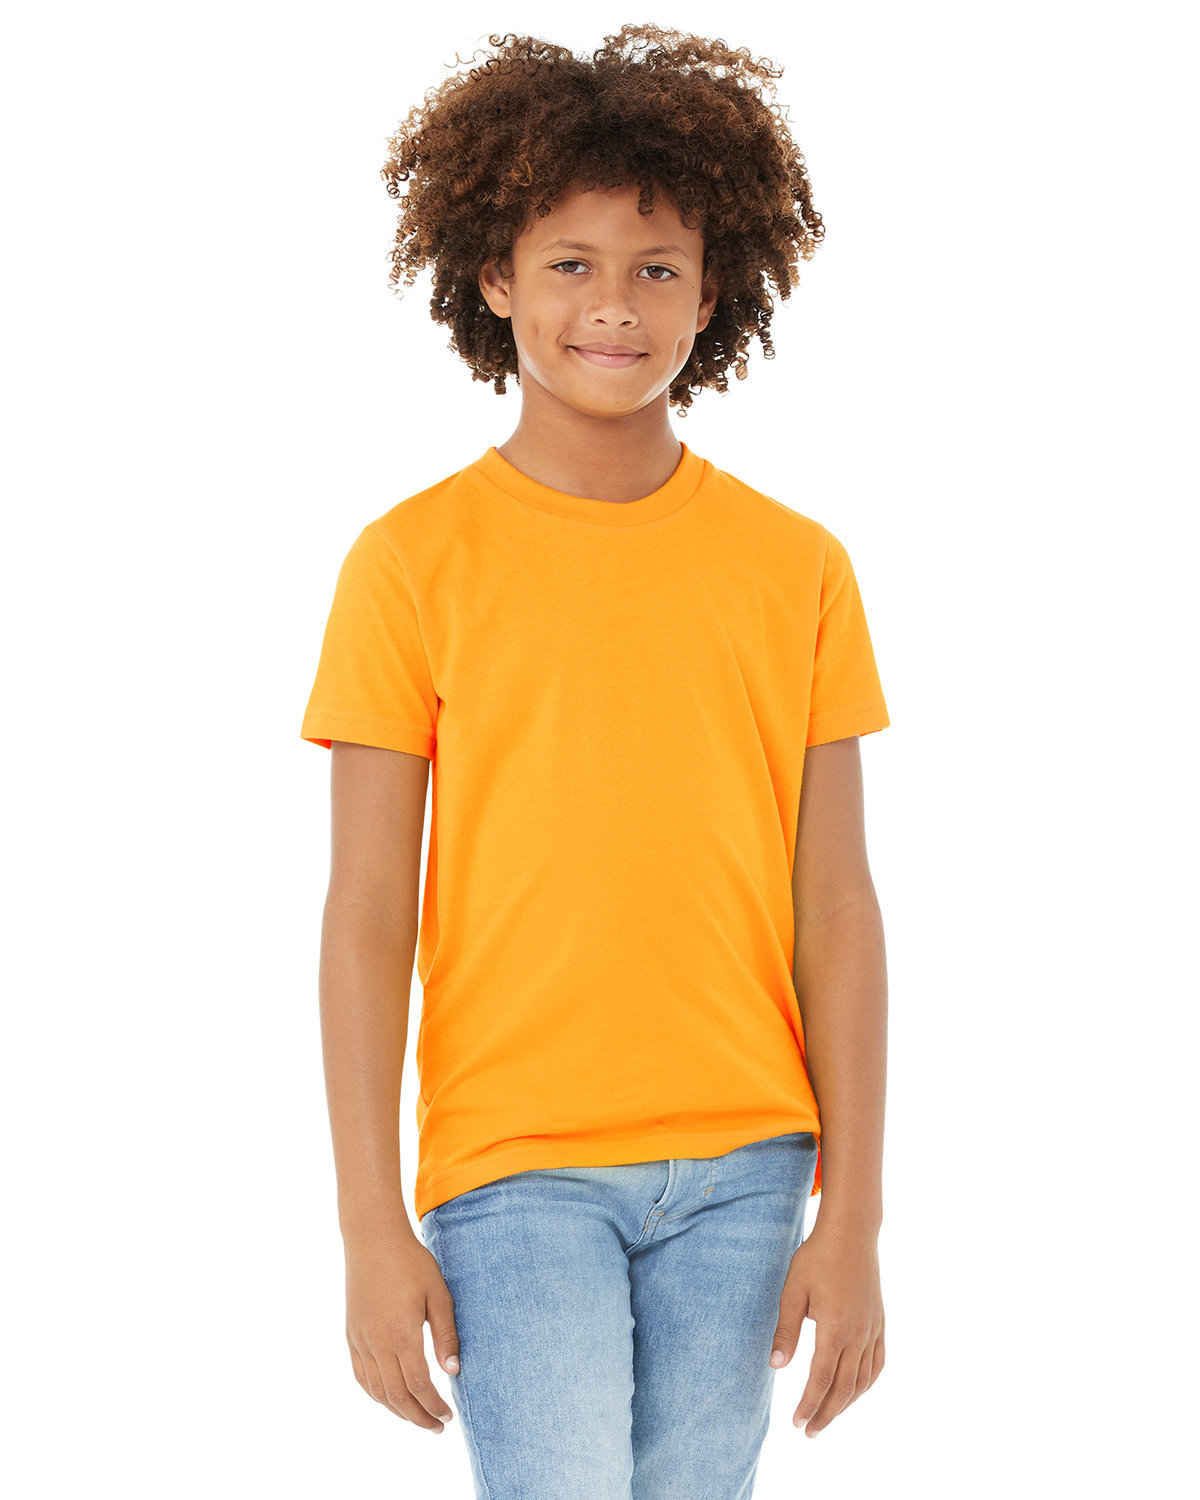 Bella + Canvas Youth Jersey T-Shirt GOLD 